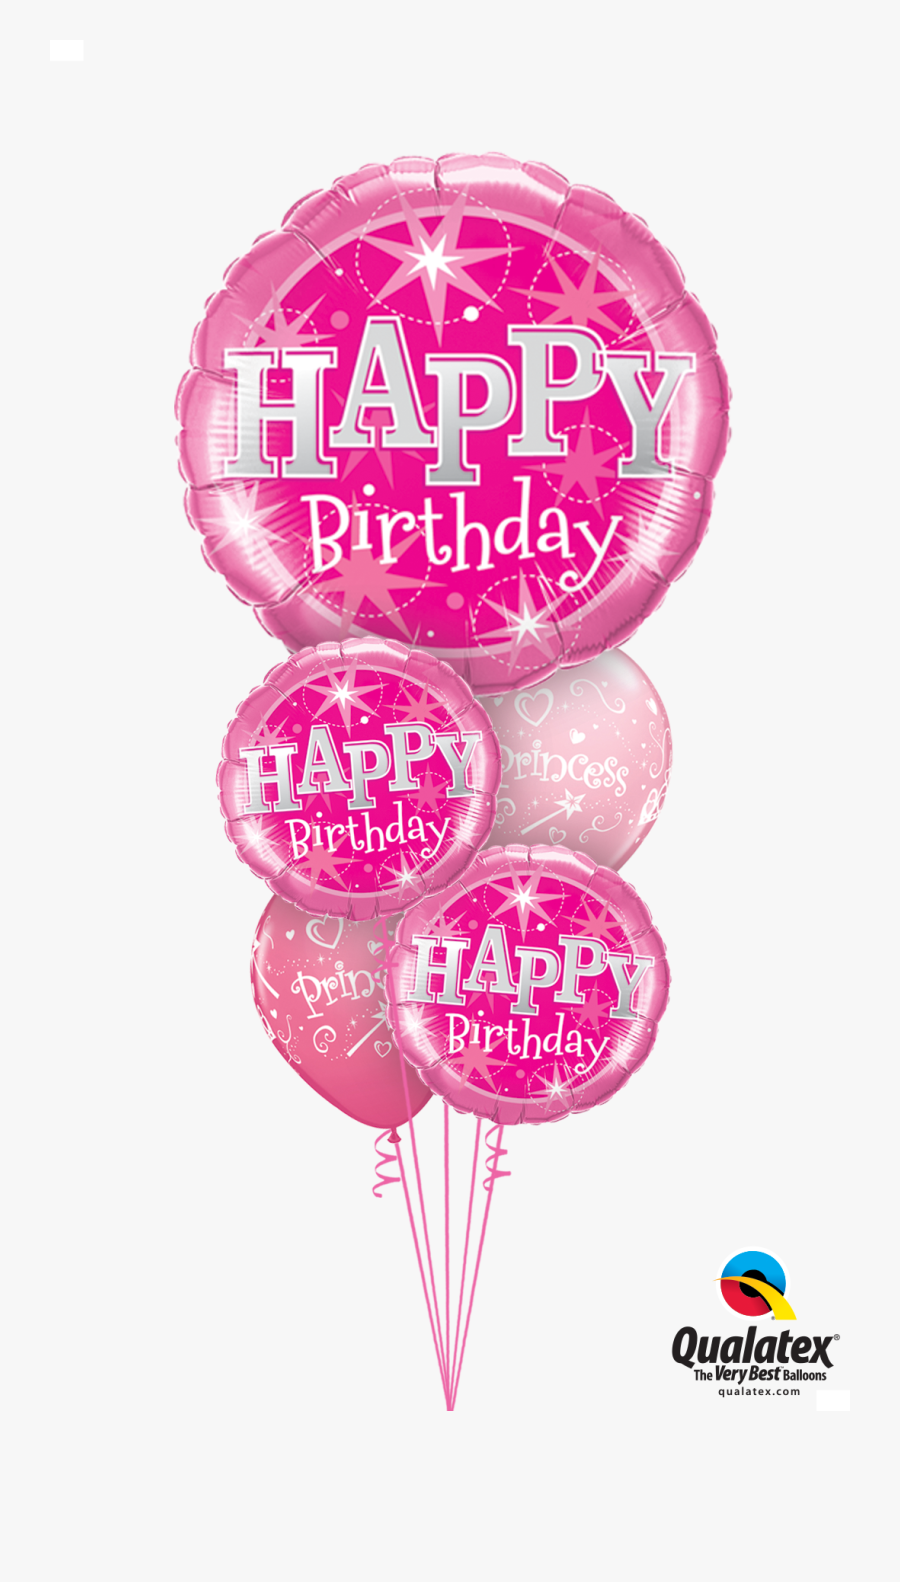 Happy Birthday Balloon Bouquet Png, Transparent Clipart